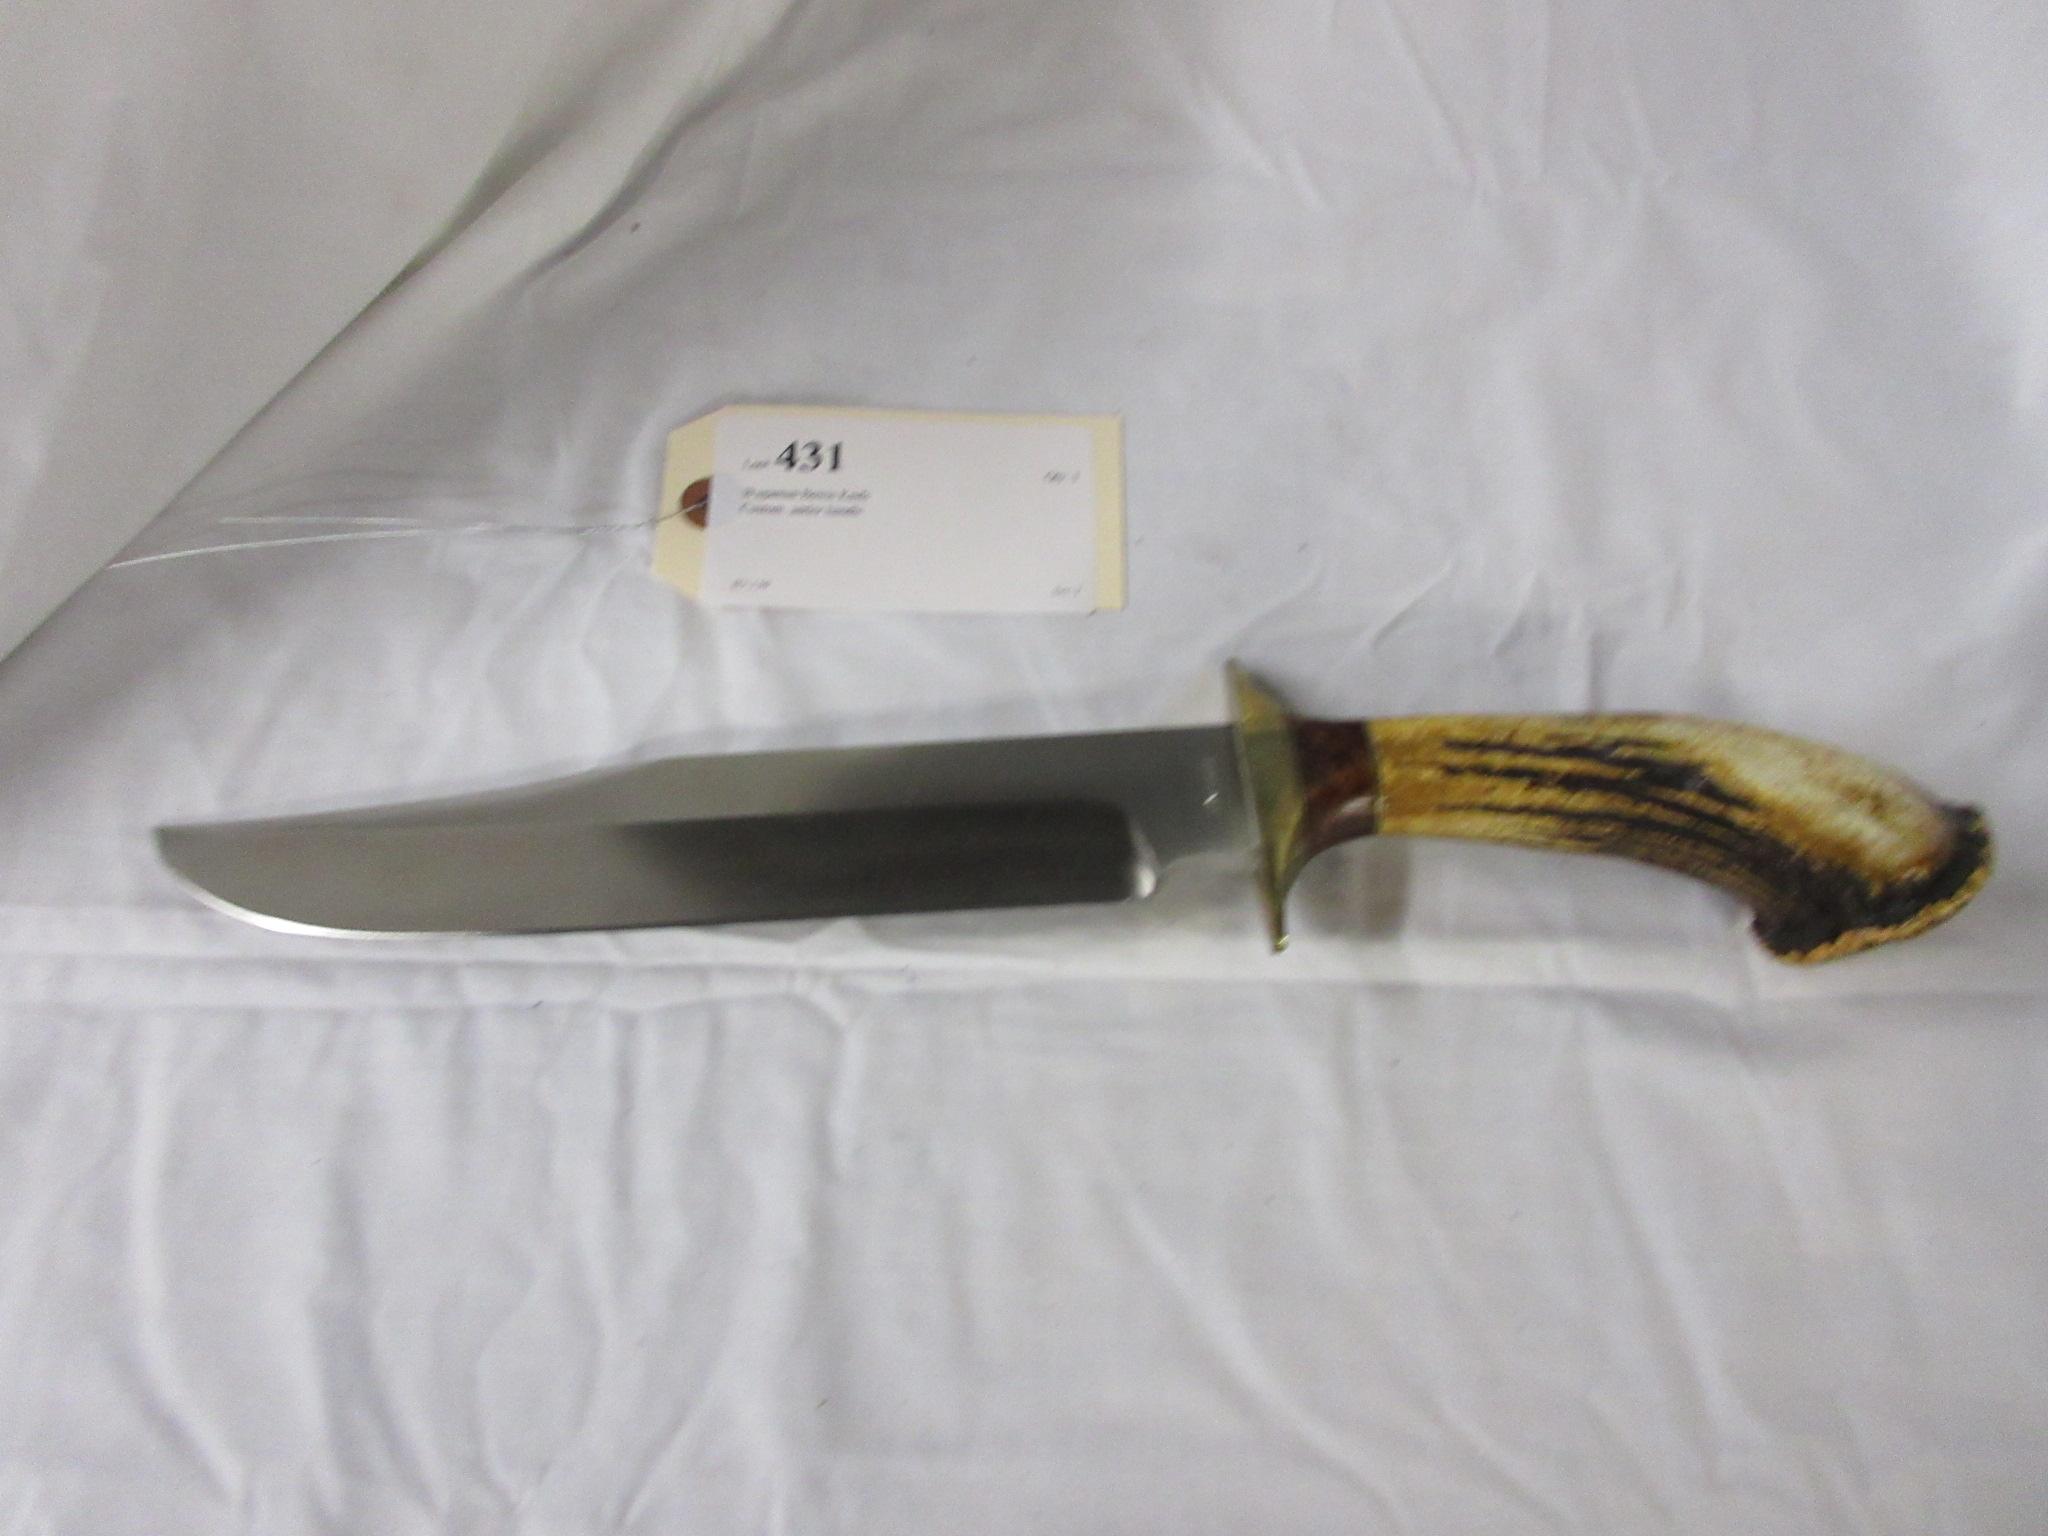 Wagaman Bowie Knife